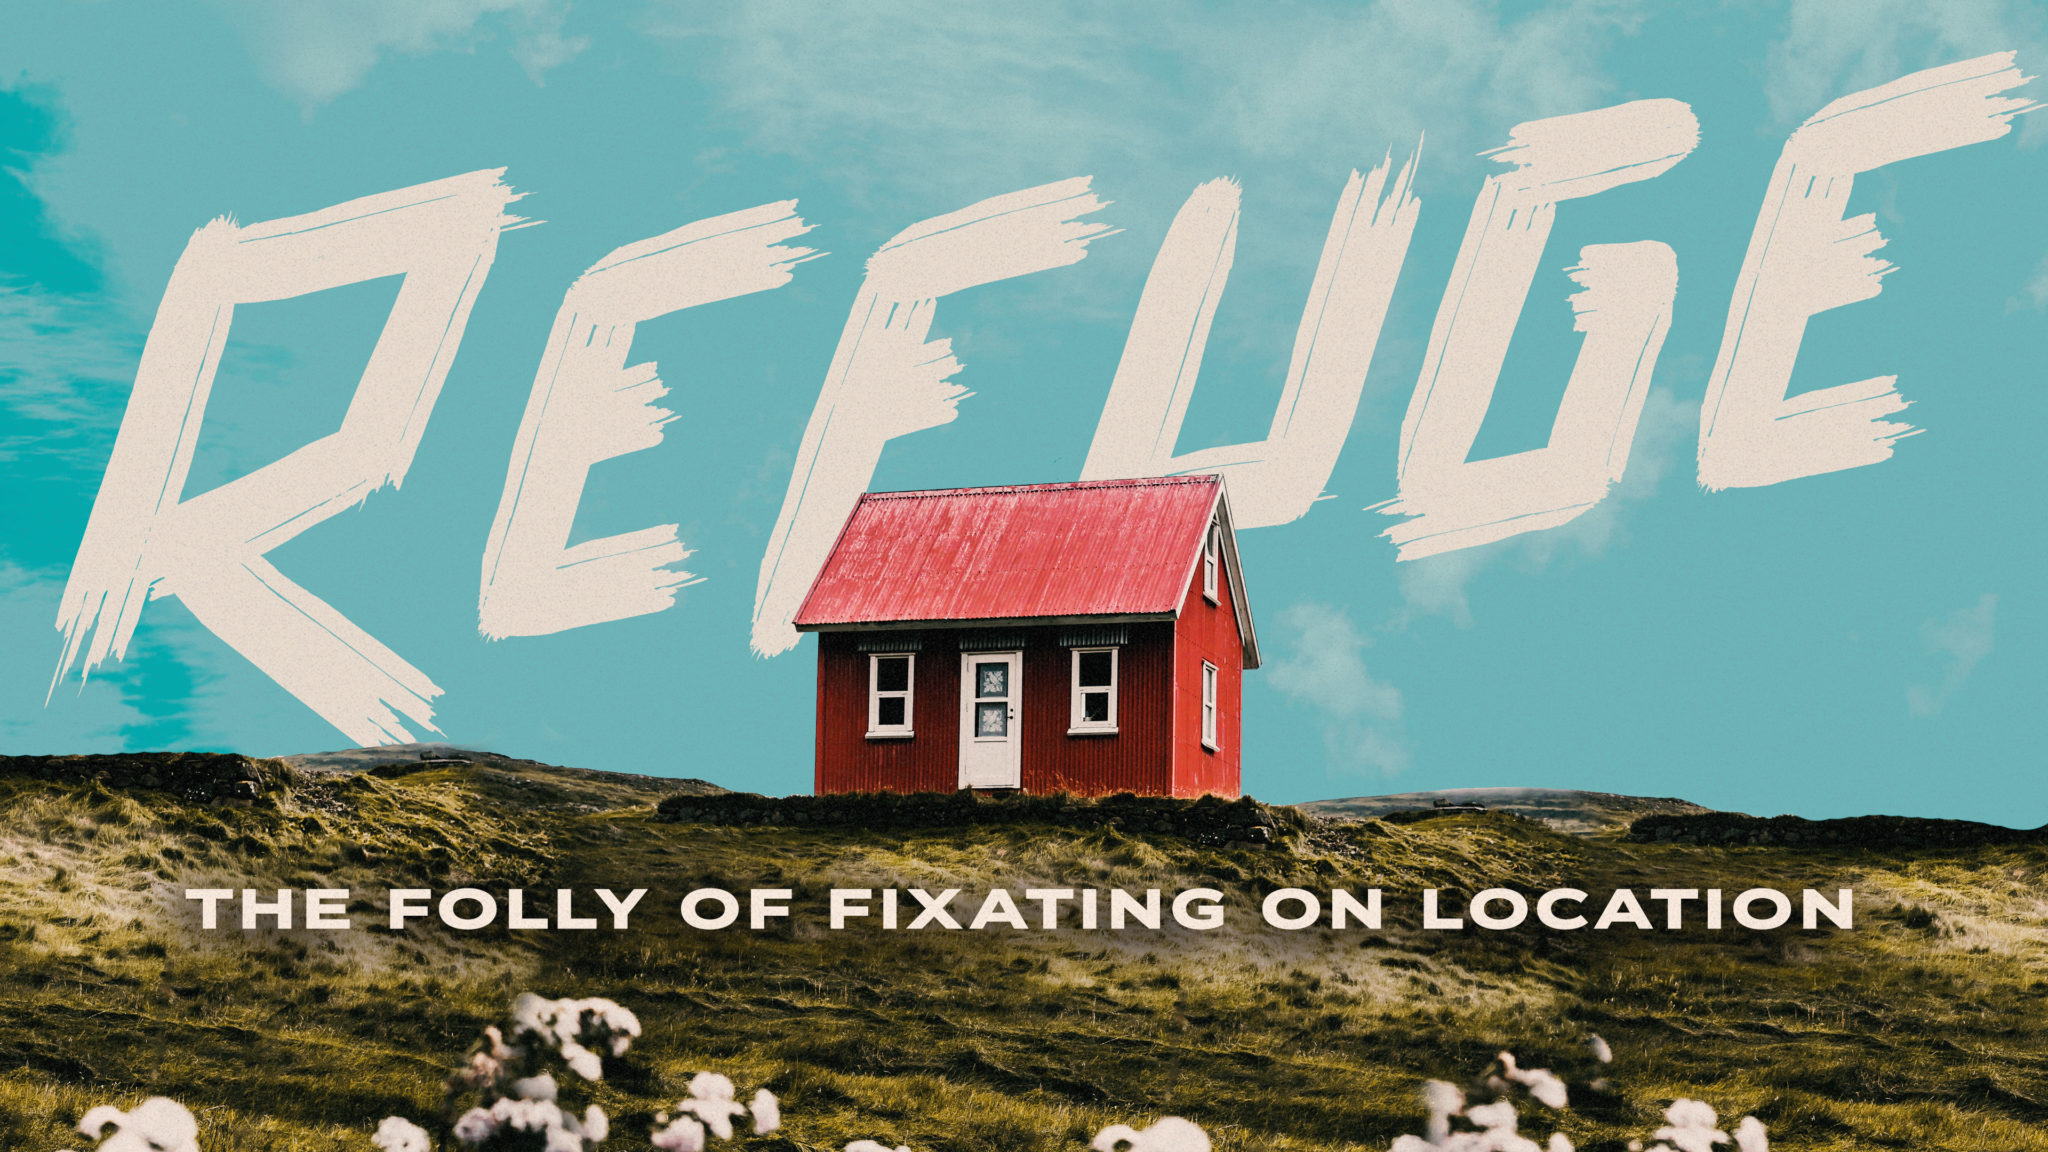 Refuge, The Folly Of Fixating On Location